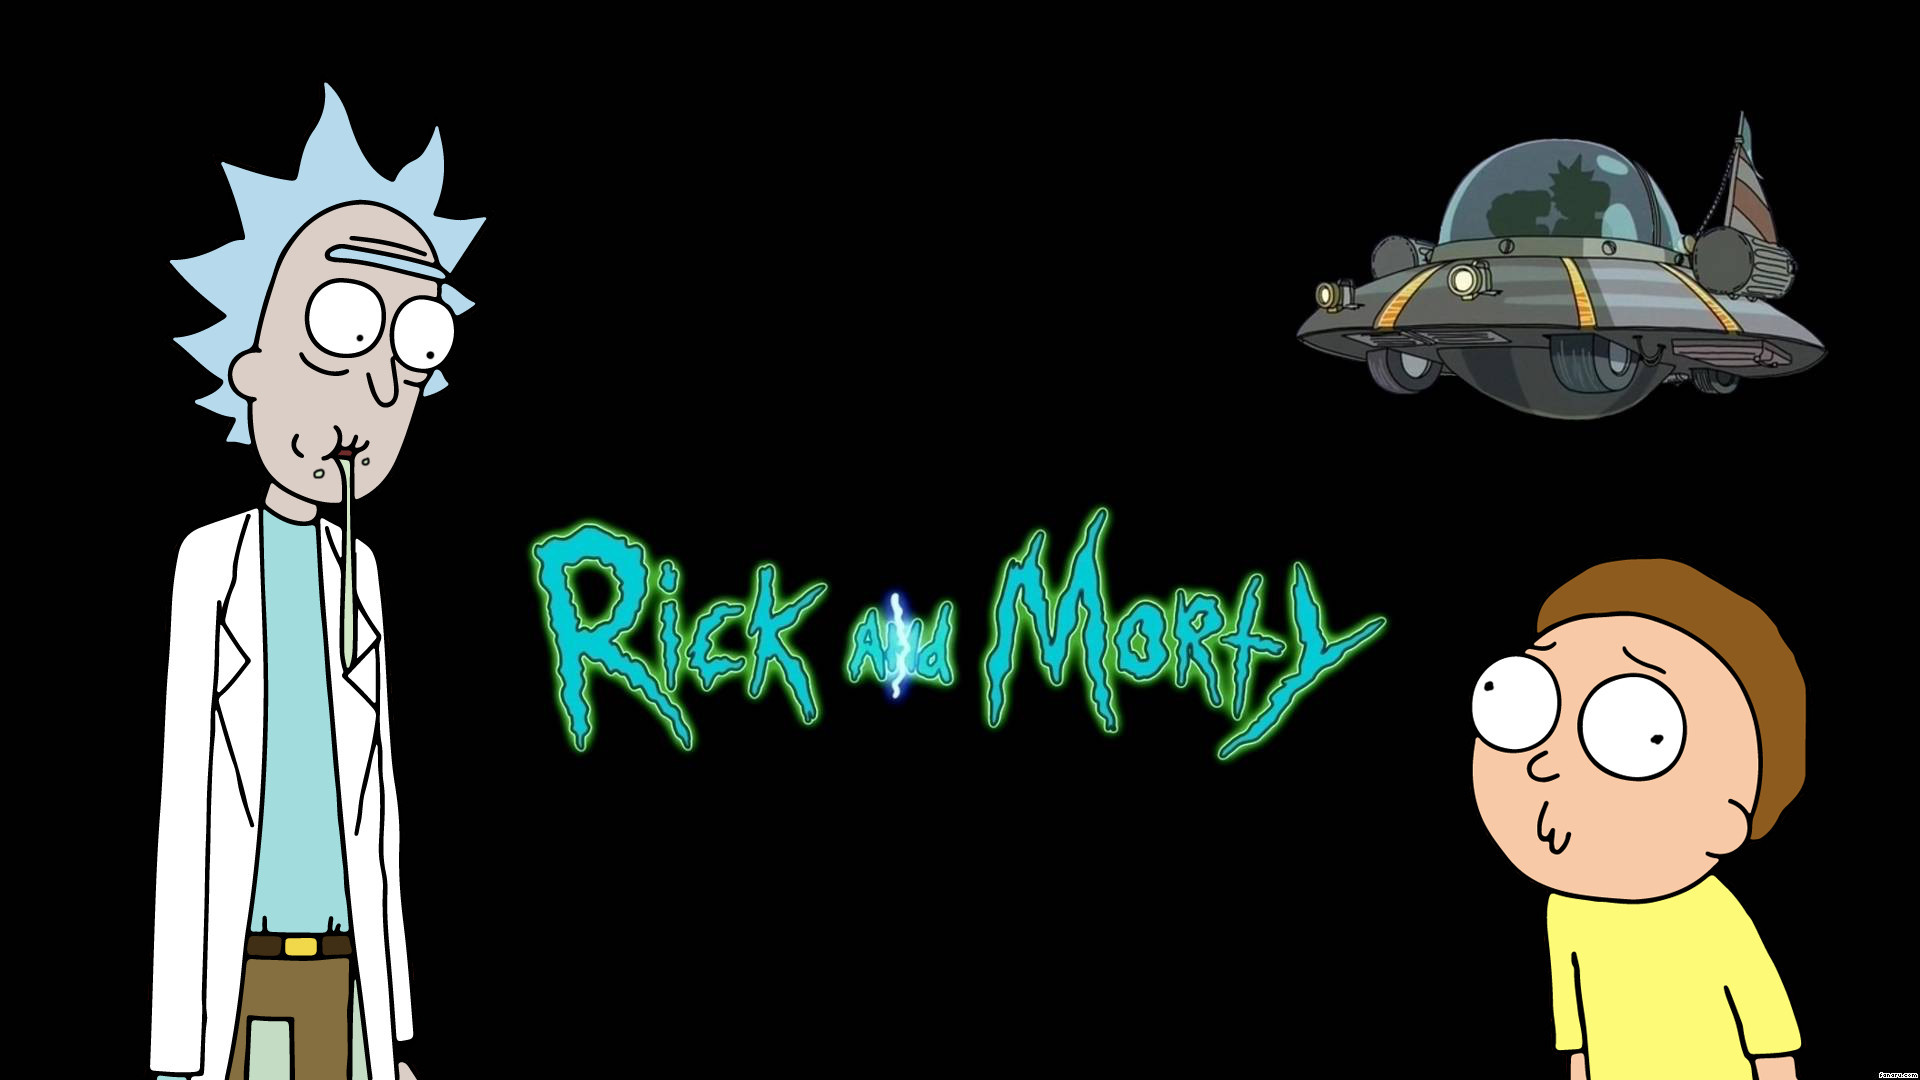 rick and morty壁紙,漫画,アニメ,アニメーション,図,フォント